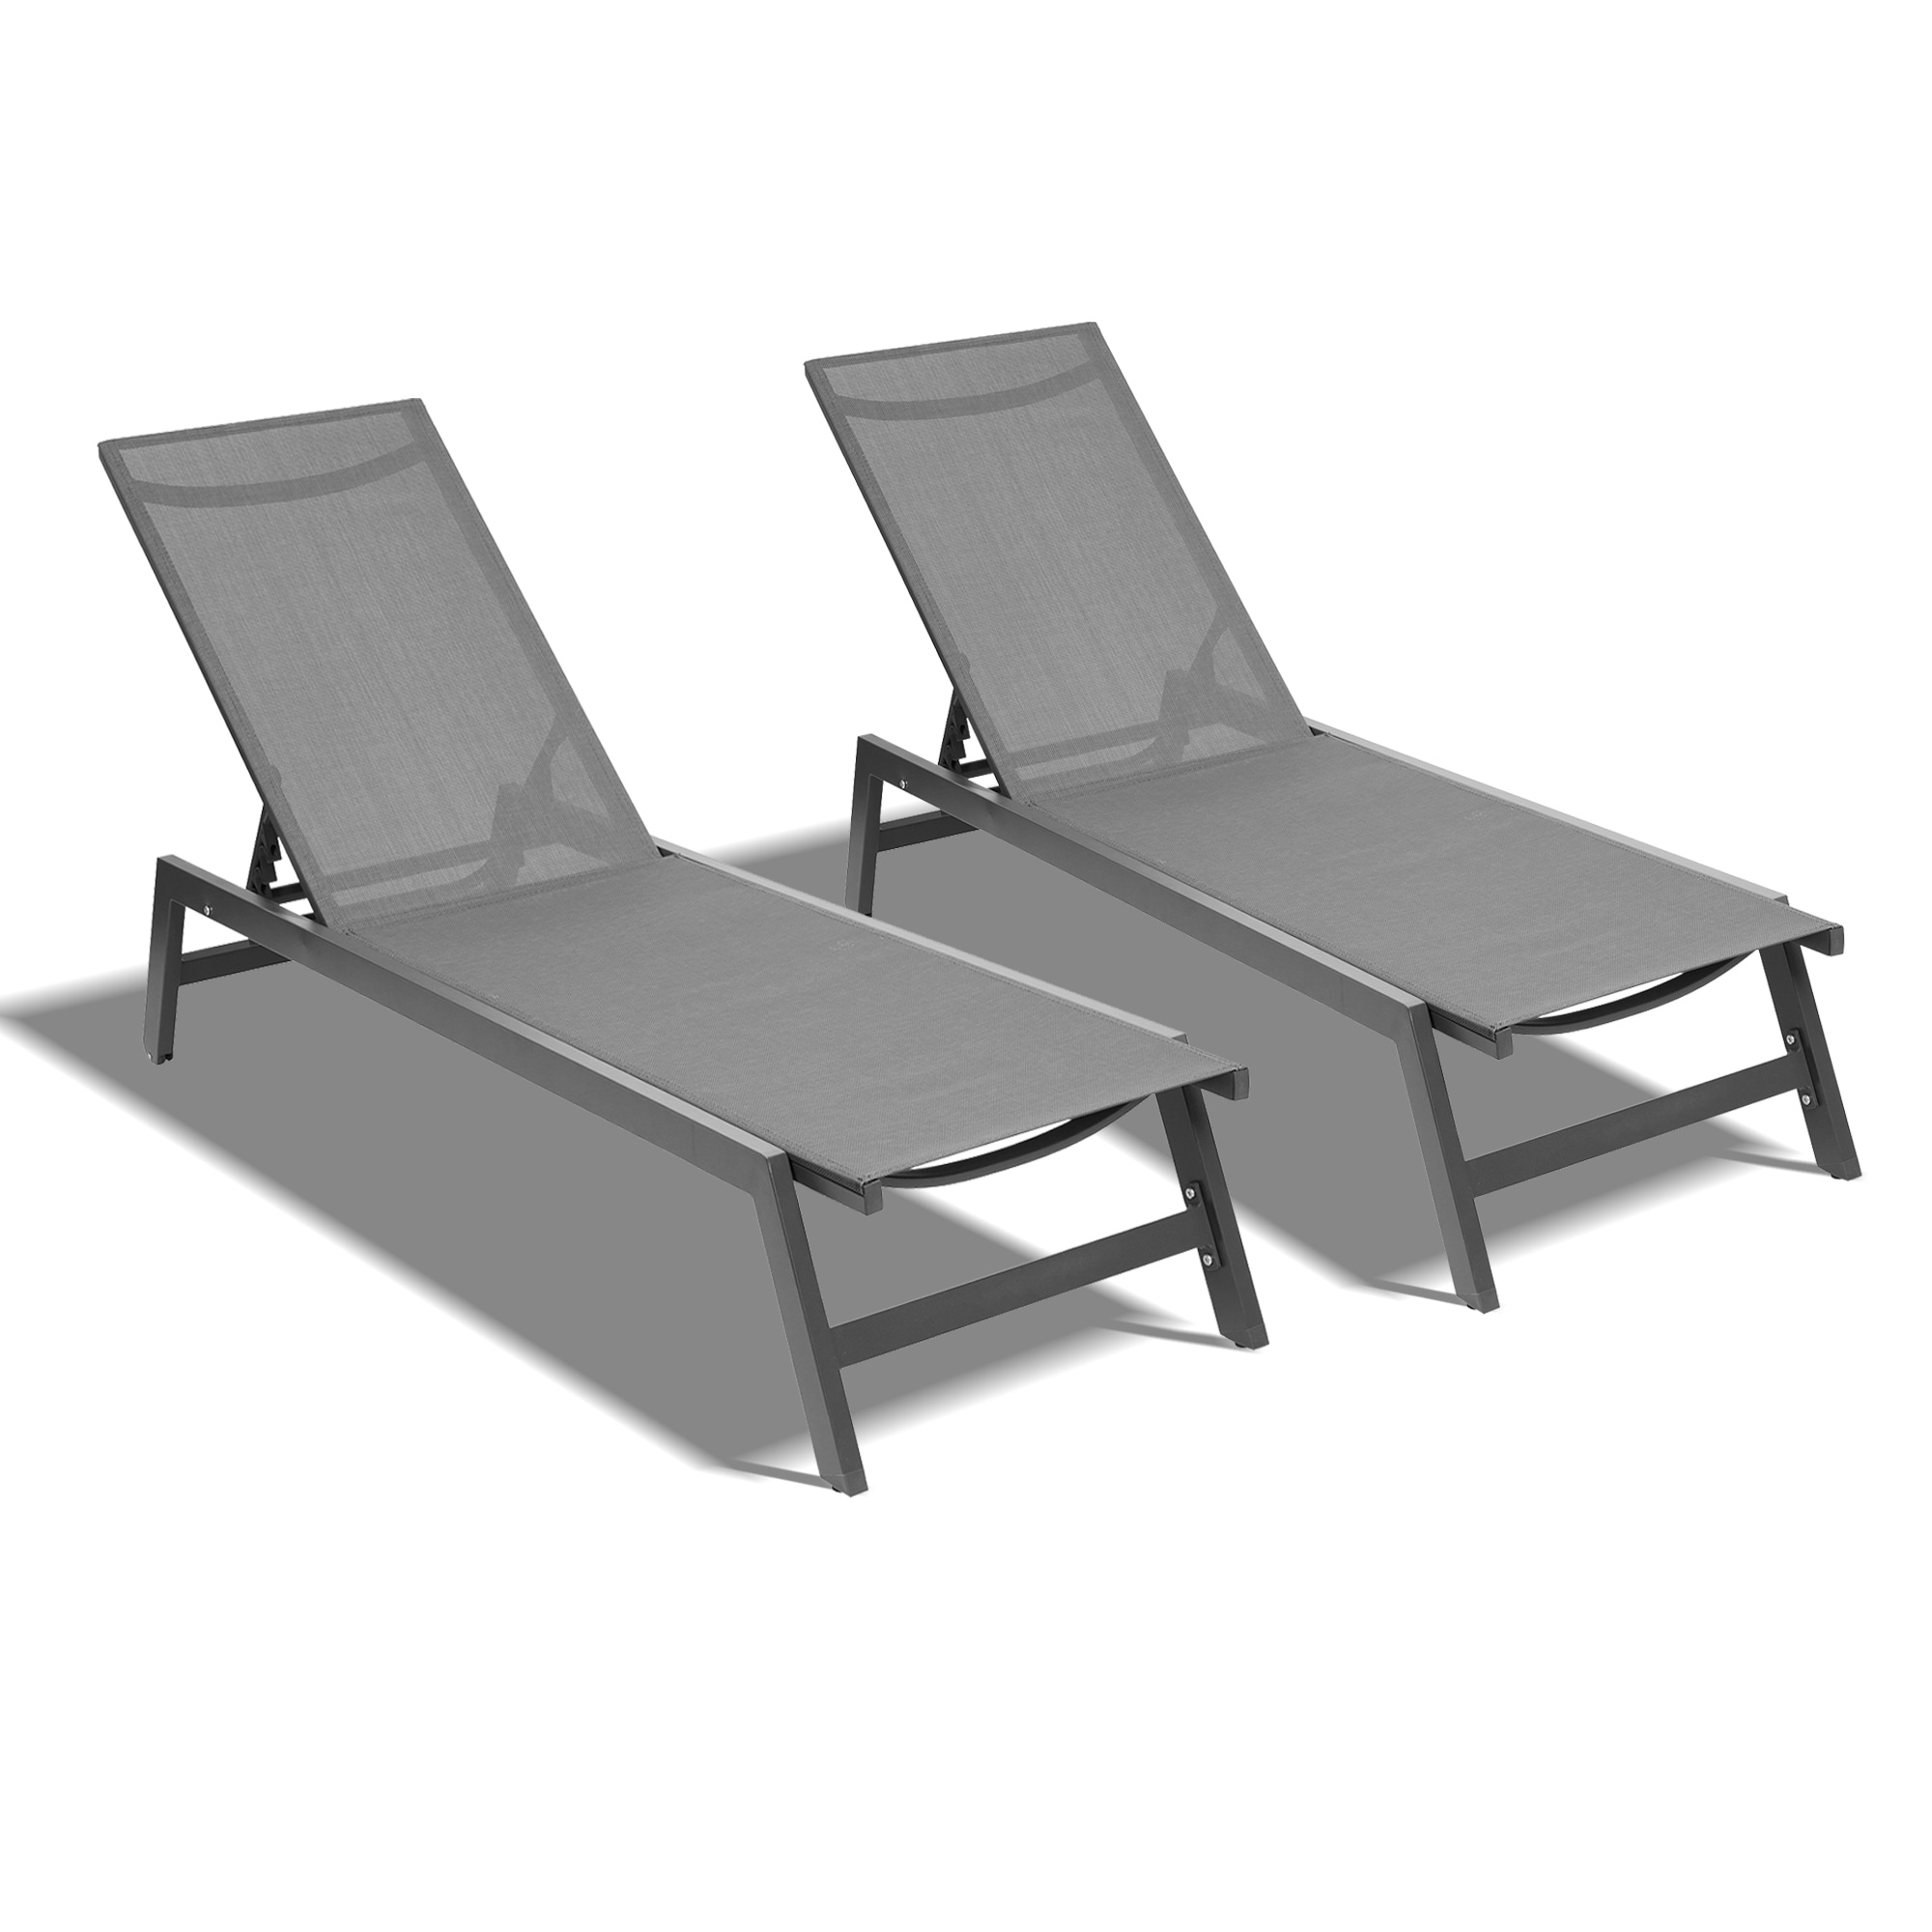 2-pcs Set 75l All Weather Outdoor Aluminum Recliner 5-angle Adjustable Patio Chaise Lounge Chair With Mesh&mobile Wheels